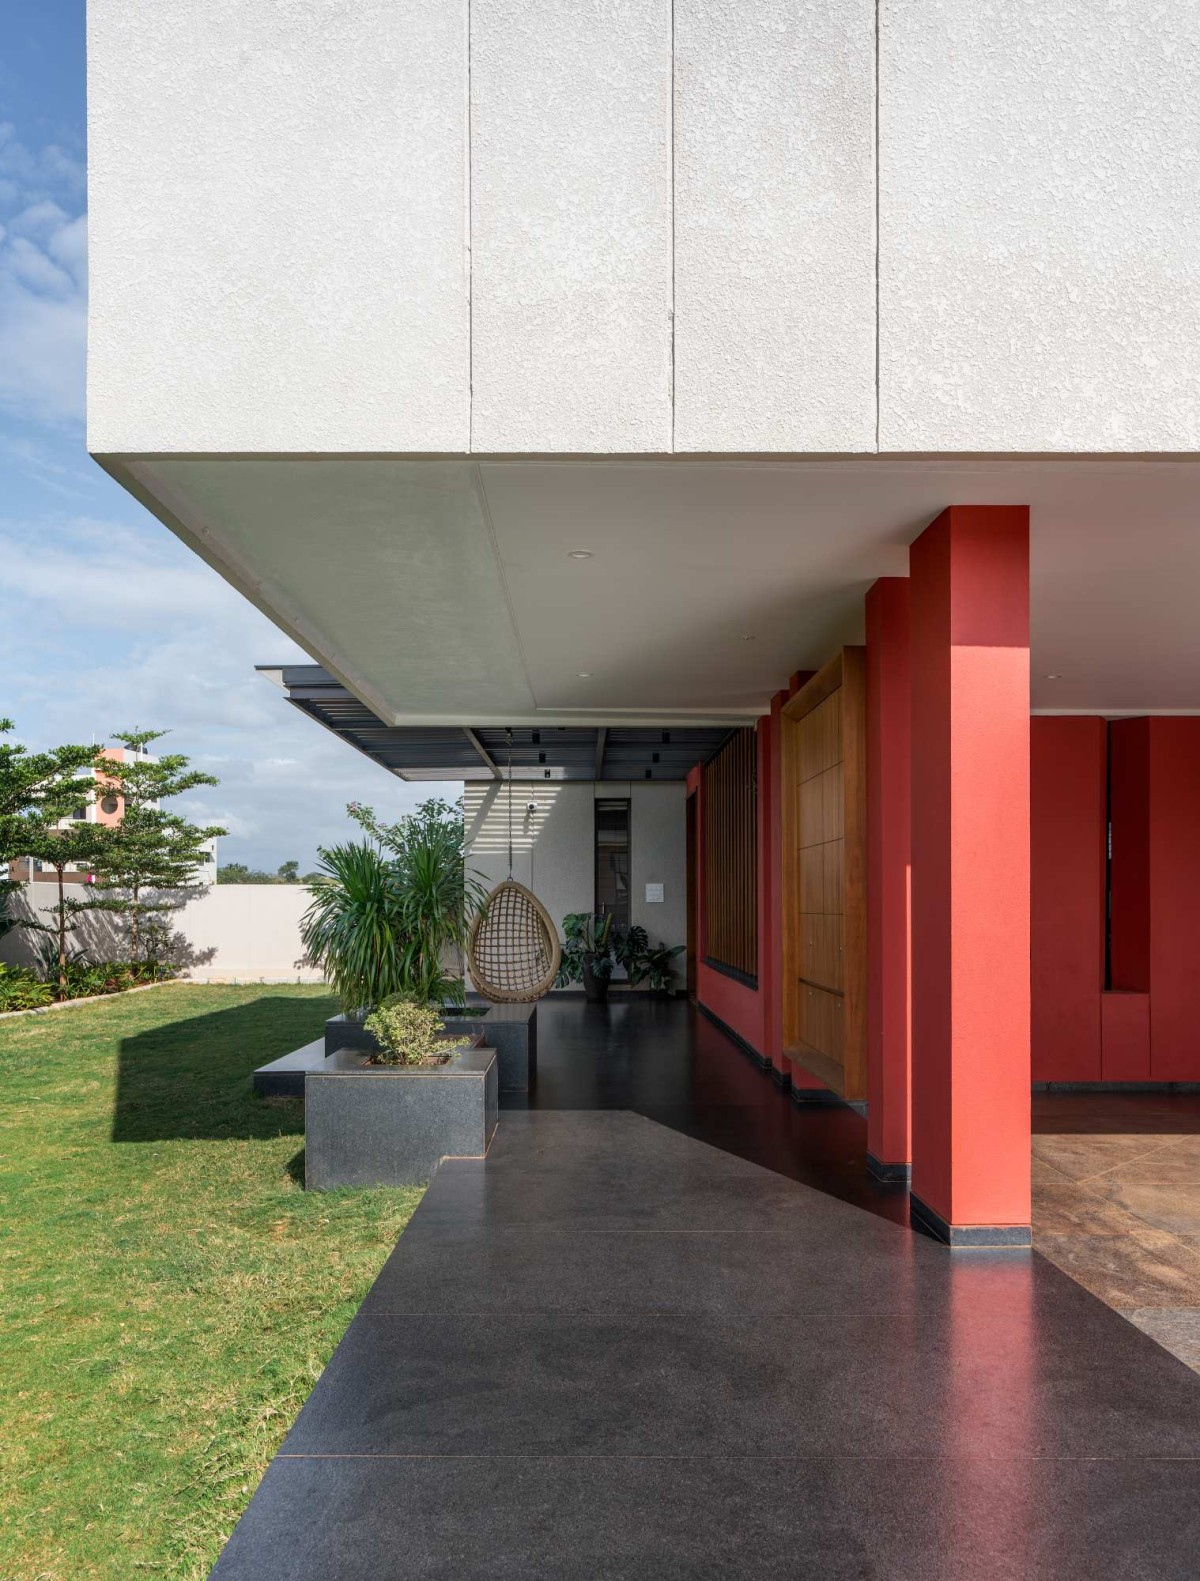 Entrance walkway of The Red Courtyard House by Jacob + Rathodi Architects